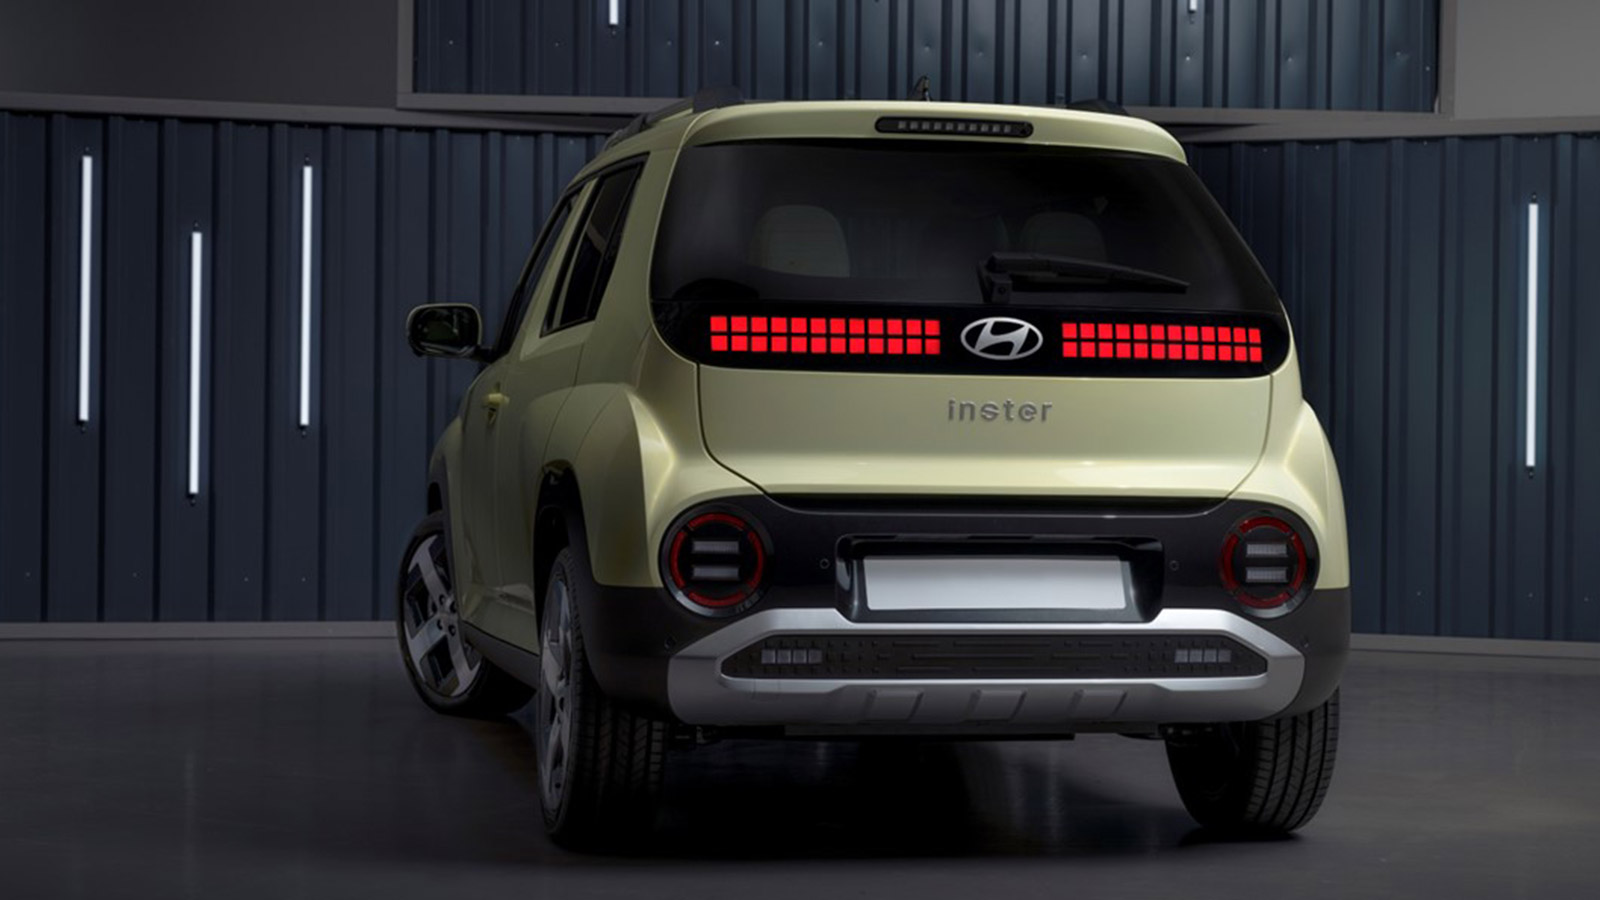 New all-electric 2024 Hyundai INSTER EV rights-free assets available to be used by media for editorial and social media purposes